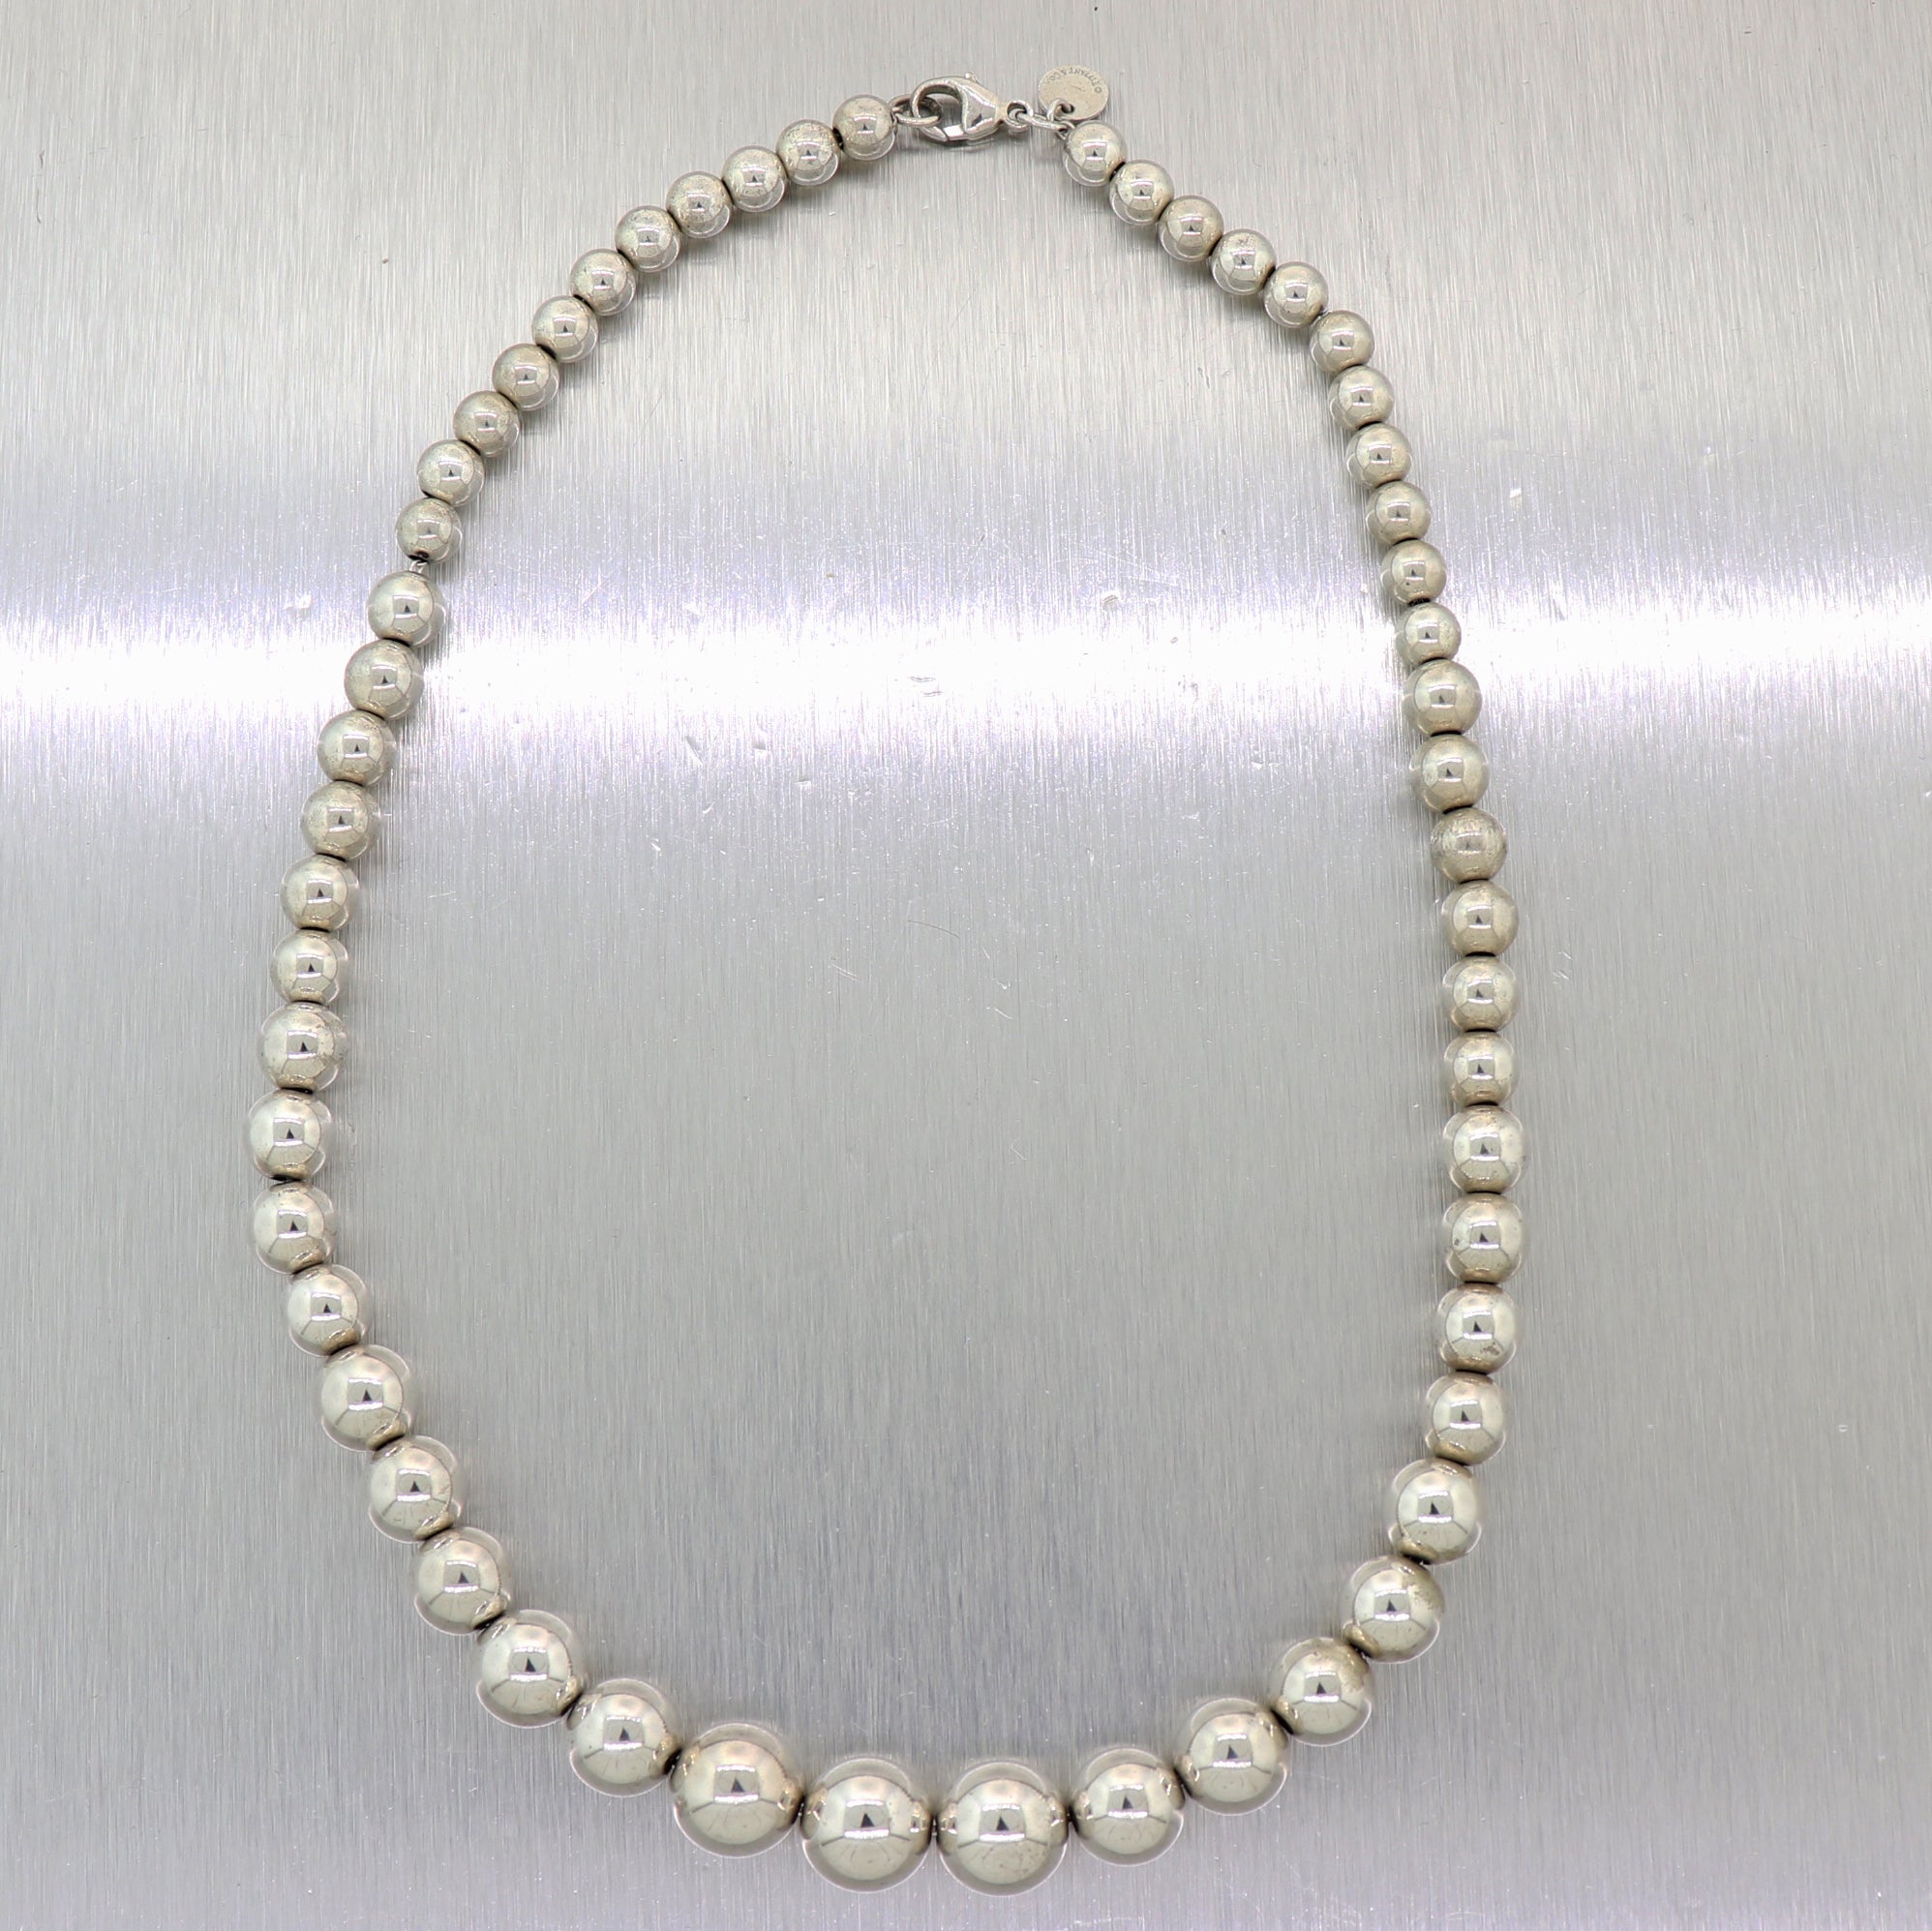 Tiffany & Co. Sterling Silver Graduated Beaded Ball 16